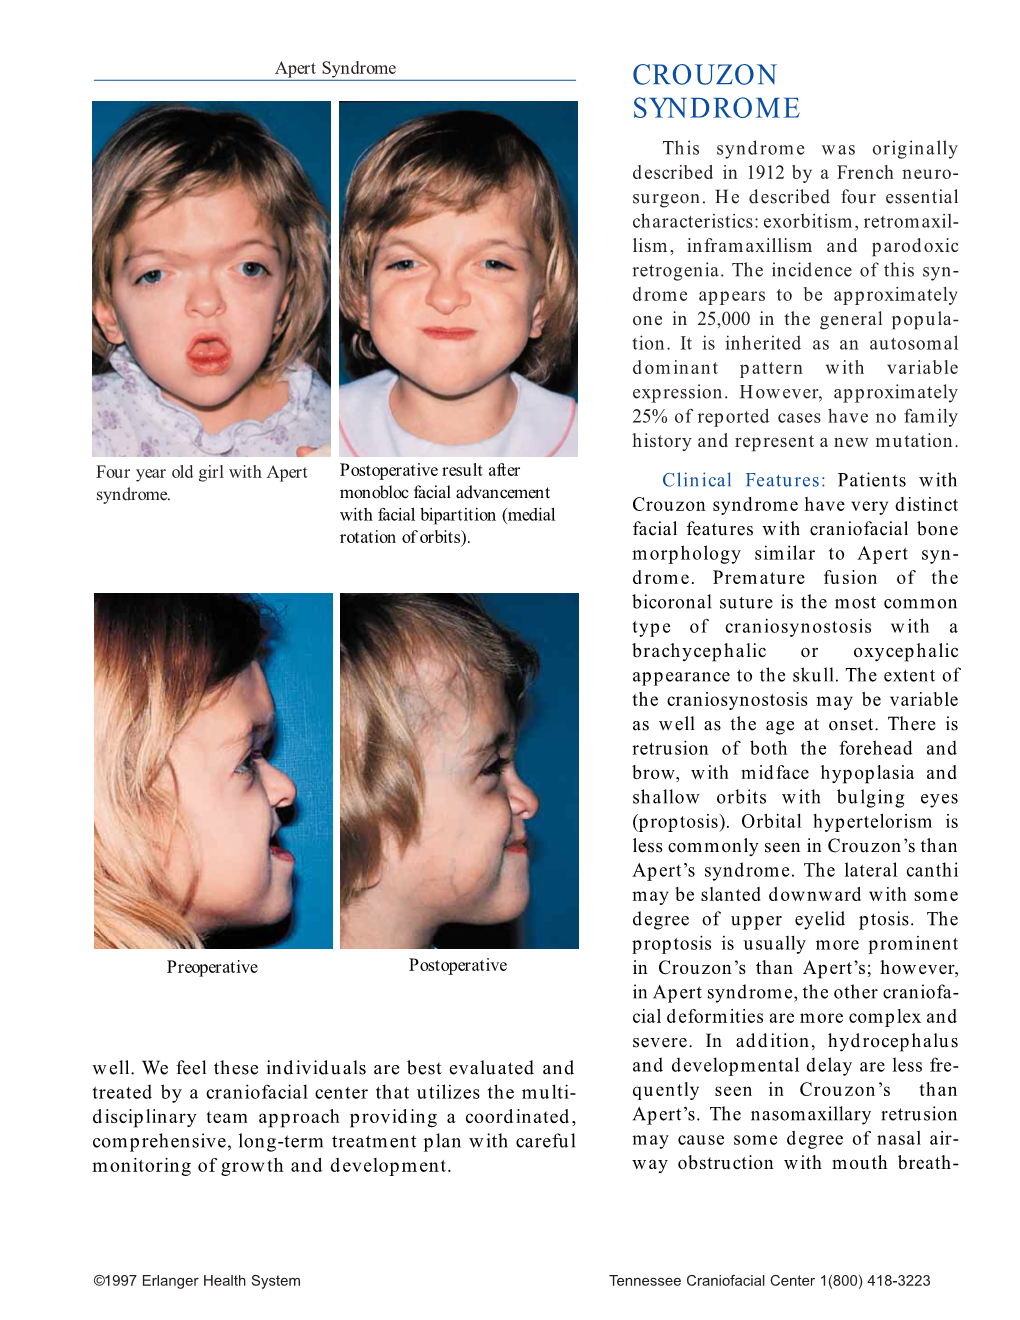 CROUZON SYNDROME This Syndrome Was Originally Described in 1912 by a French Neuro- Surgeon